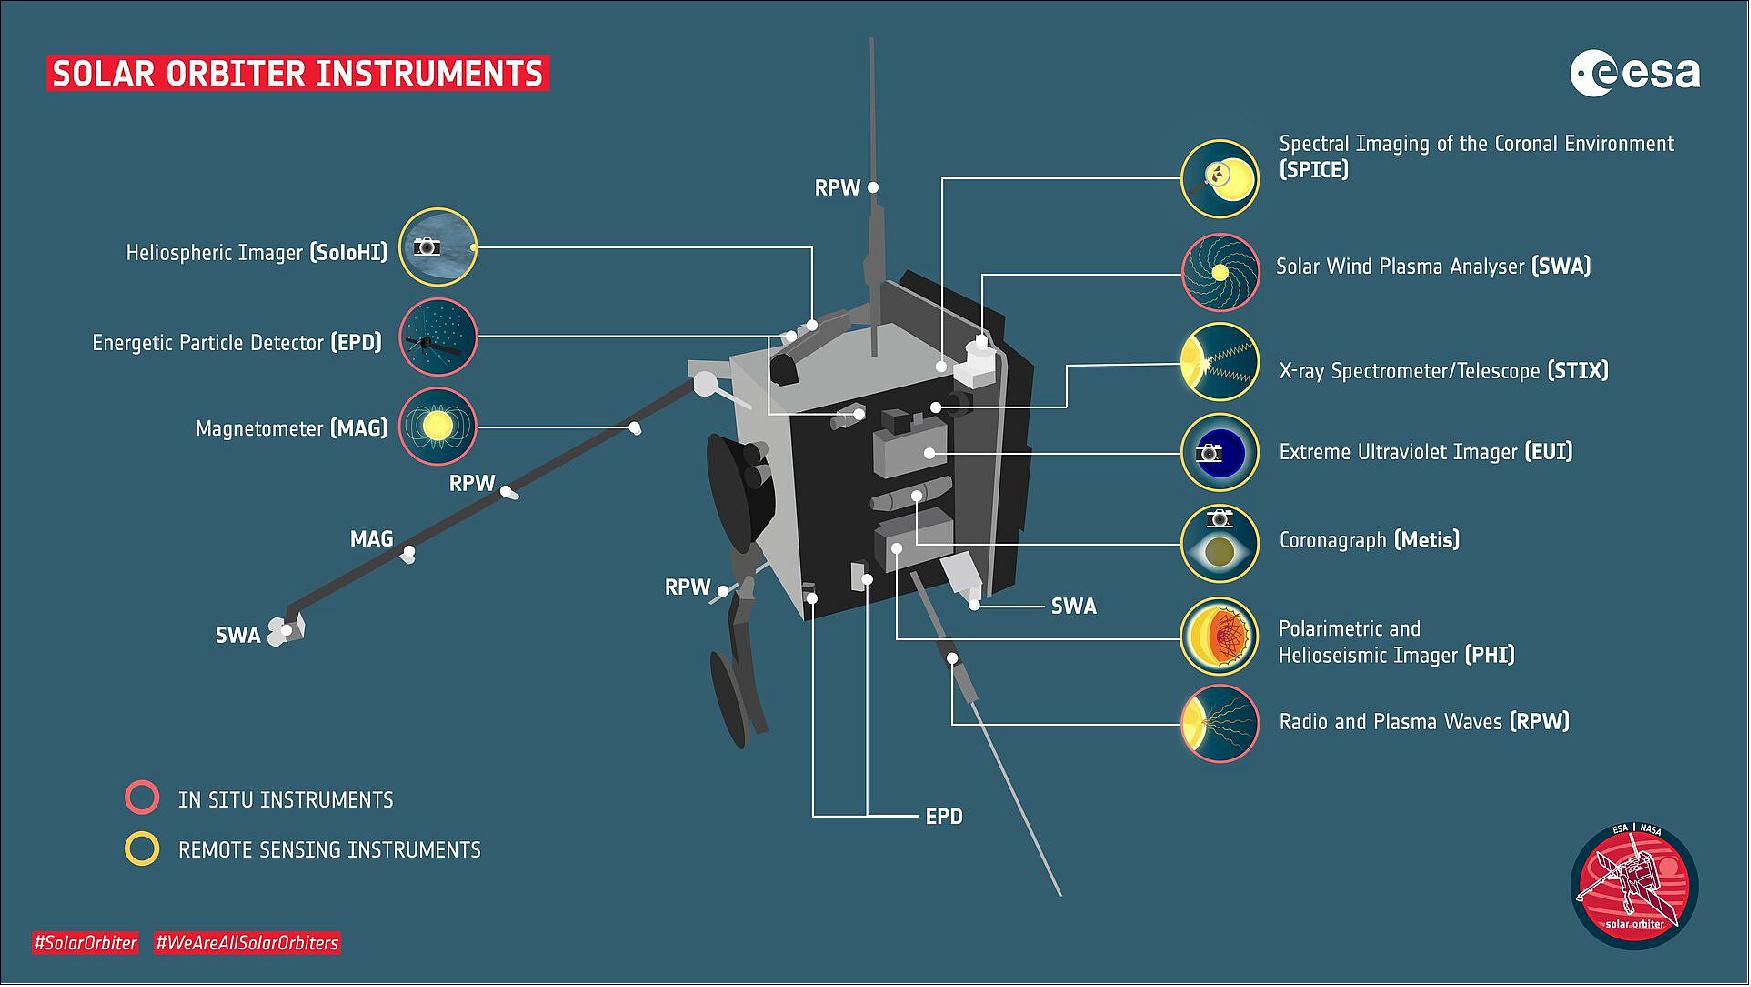 Figure 78: Solar Orbiter's suite of ten science instruments that will study the Sun. There are two types: in situ and remote sensing. The in situ instruments measure the conditions around the spacecraft itself. The remote-sensing instruments measure what is happening at large distances away. Together, both sets of data can be used to piece together a more complete picture of what is happening in the Sun's corona and the solar wind (image credit: ESA-S.Poletti)